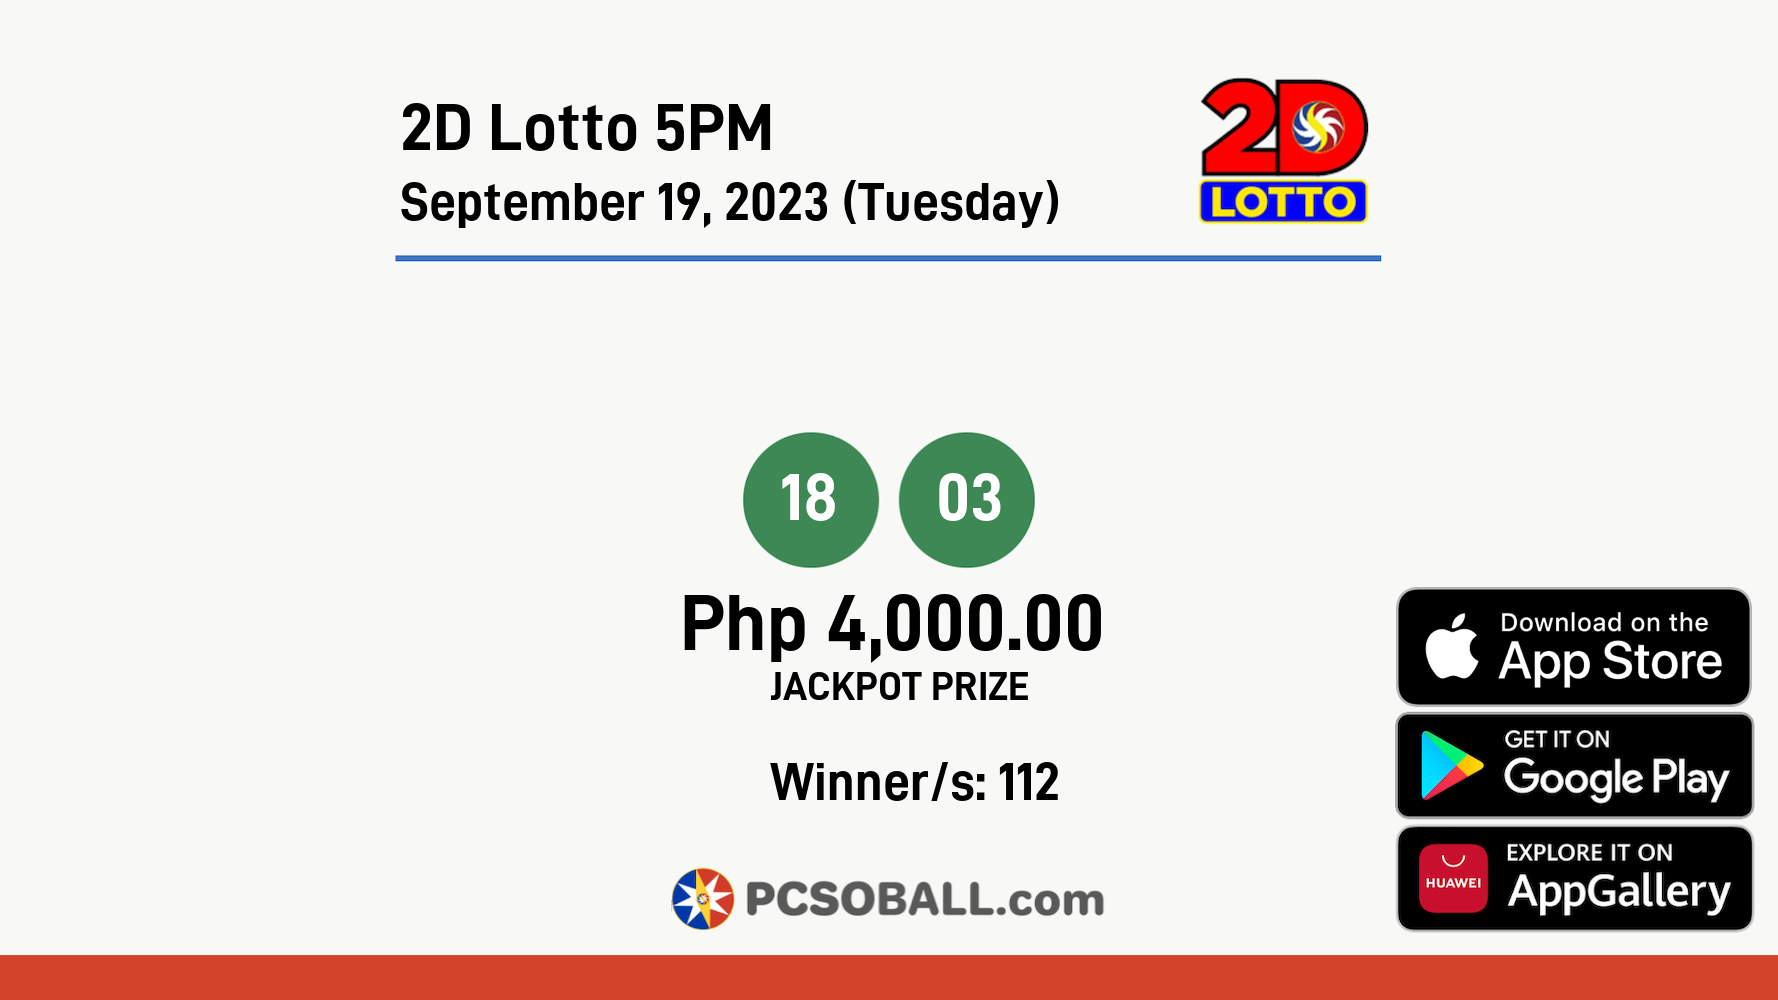 2D Lotto 5PM September 19, 2023 (Tuesday) Result